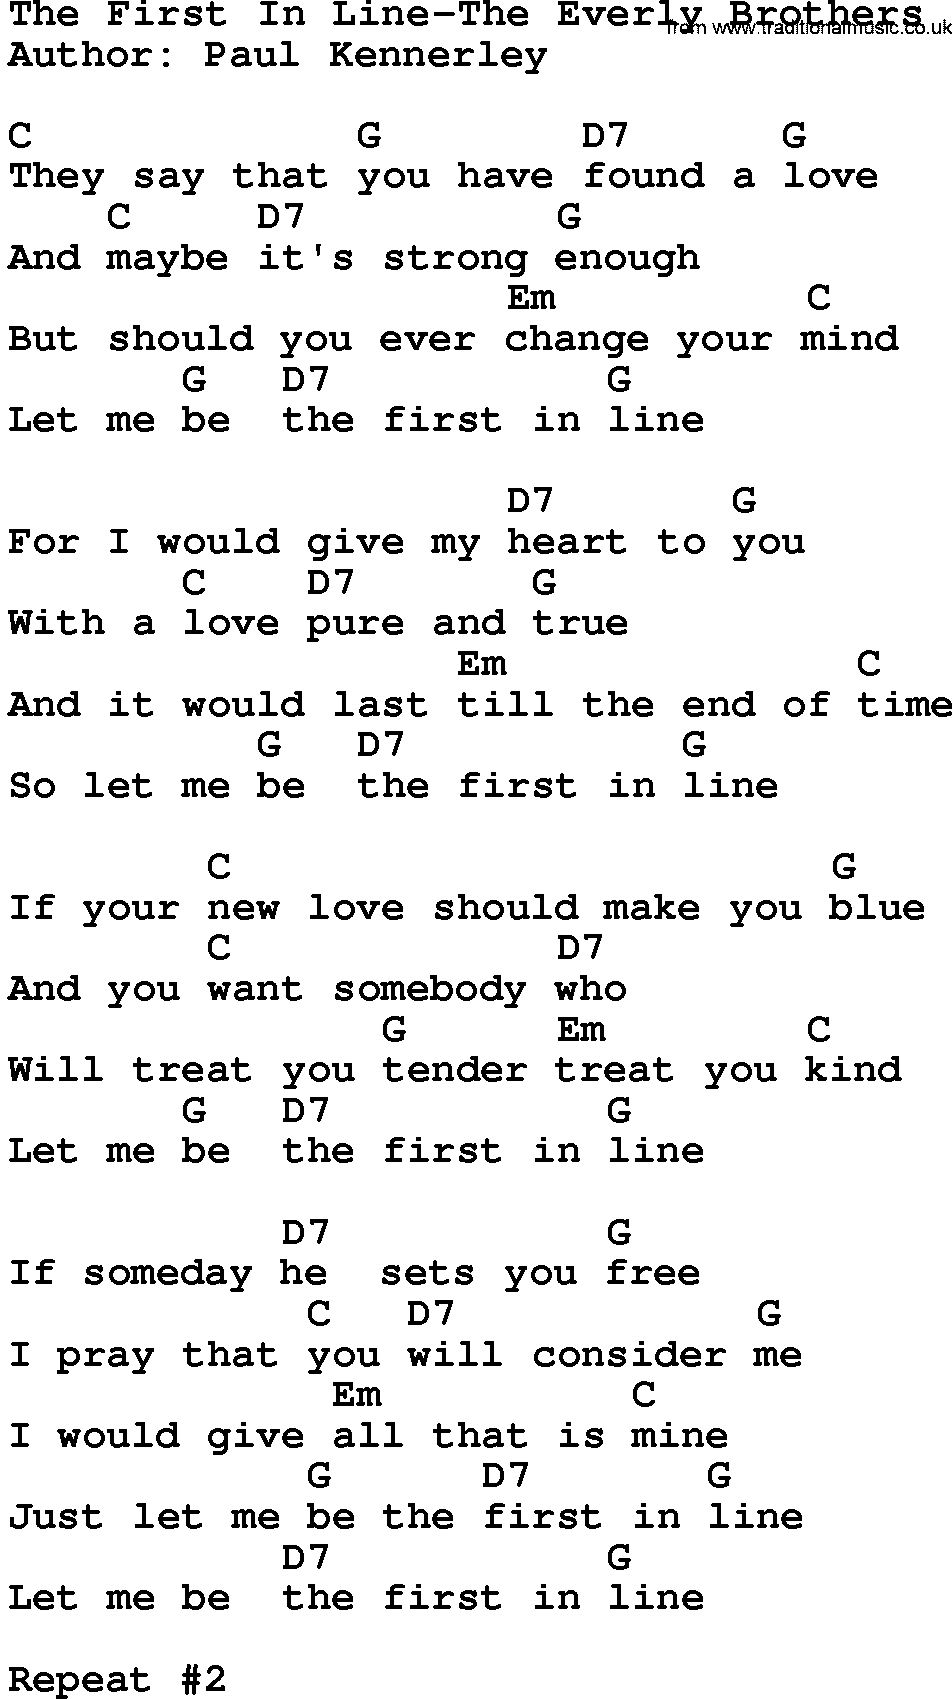 Country music song: The First In Line-The Everly Brothers lyrics and chords